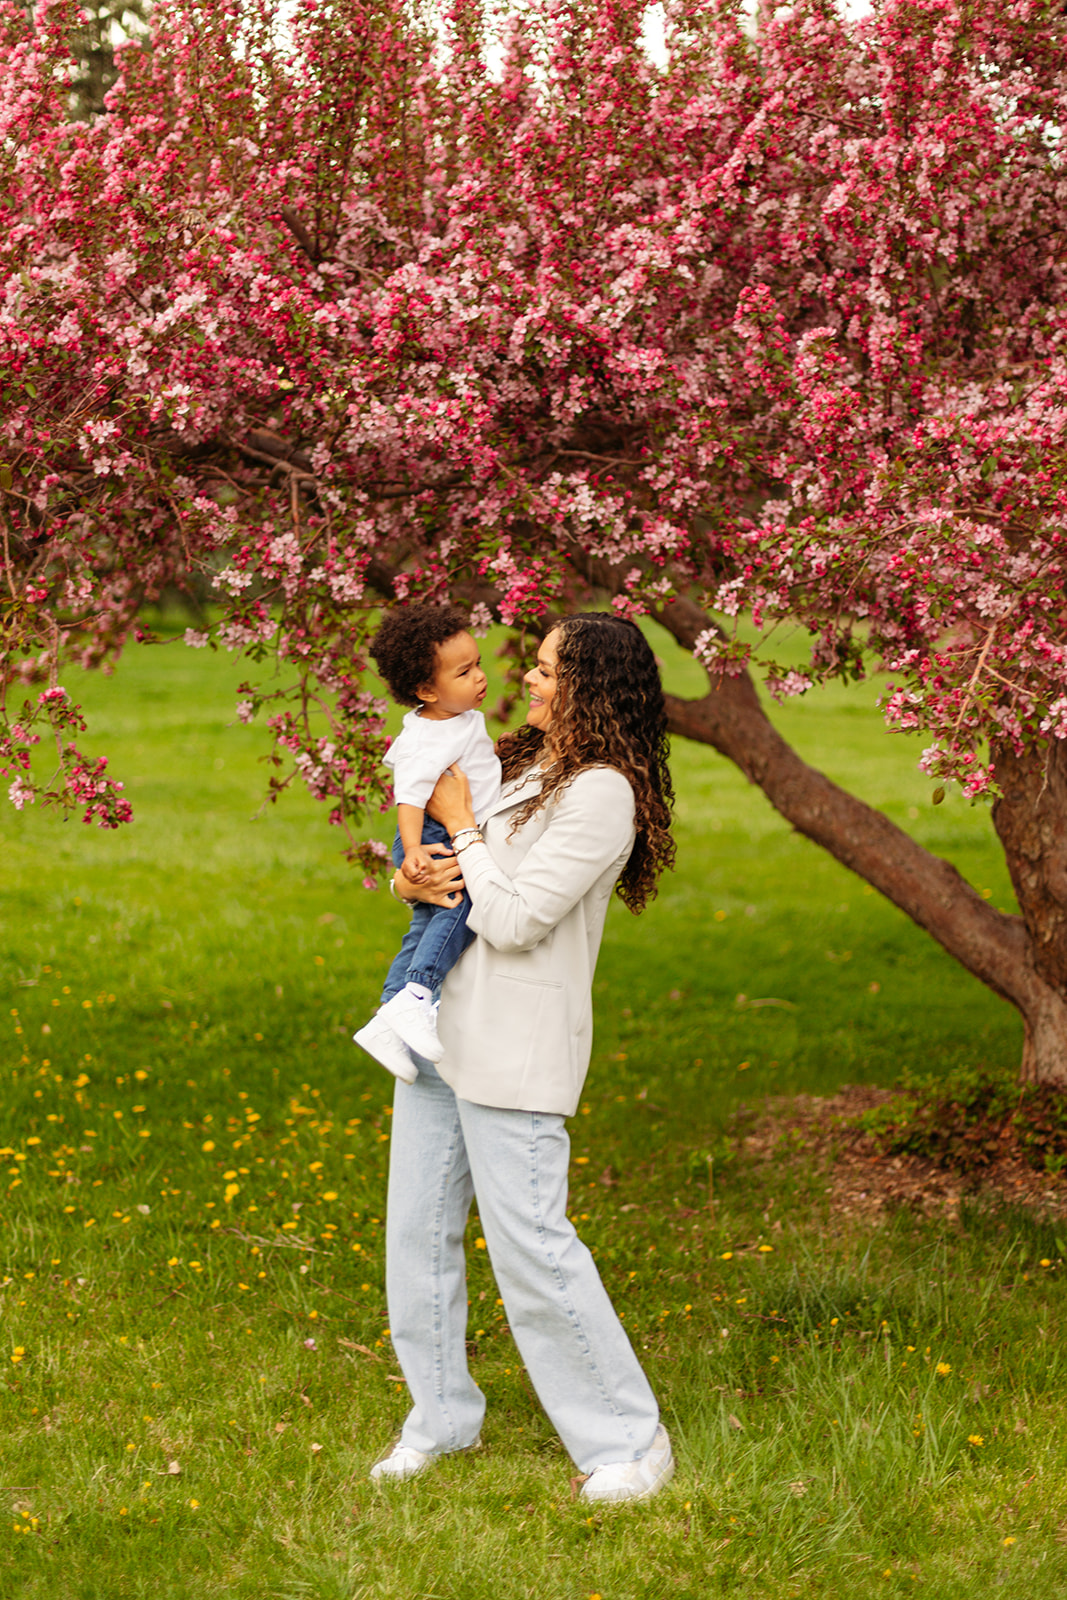 pink cherry blossom trees in denver colorado for family photos in city park with green grass